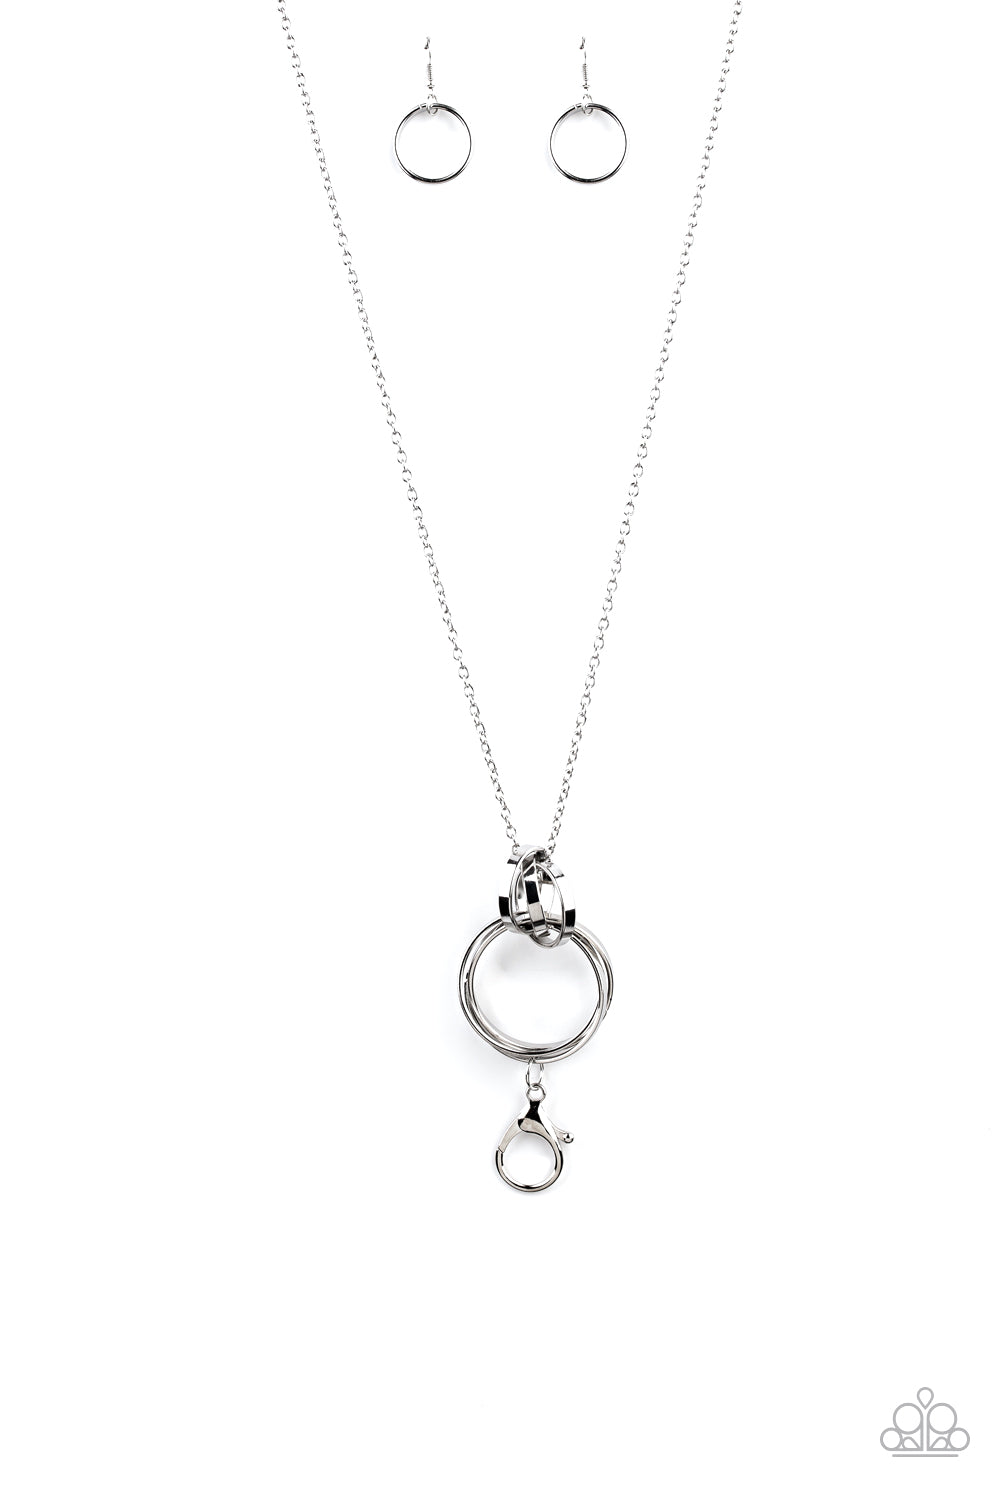 INNOVATED IDOL - SILVER LANYARD NECKLACE